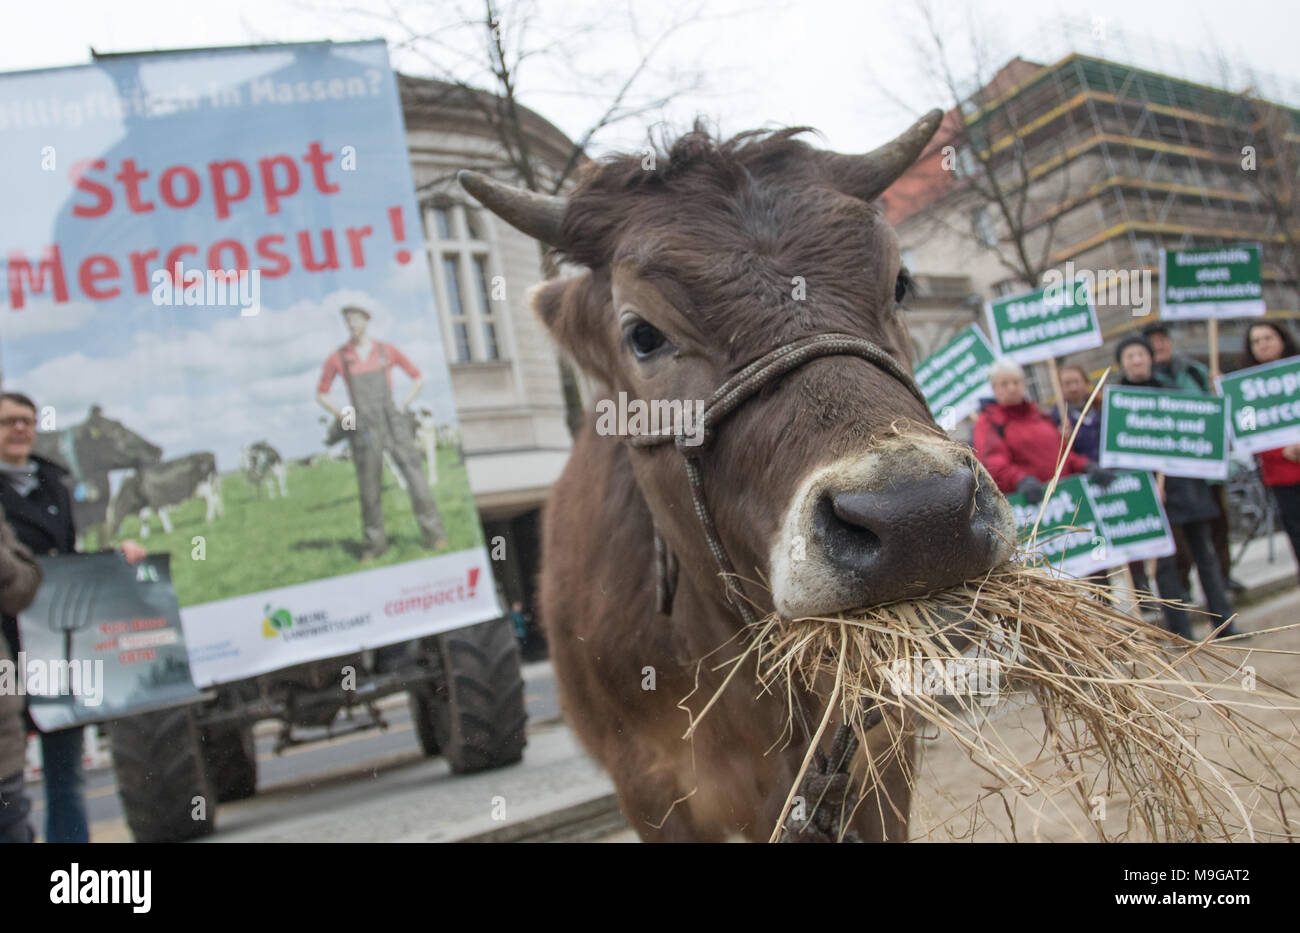 26 March 2018, Germany, Berlin: Activists protesting with the one year old cow Omega against the EU Mercosur treaty in front of the Ministry for Finance. If the treaty is passed, it is feared that mass imports of cheap meat from Latin America will be imported to the EU. Photo: Jörg Carstensen/dpa Stock Photo